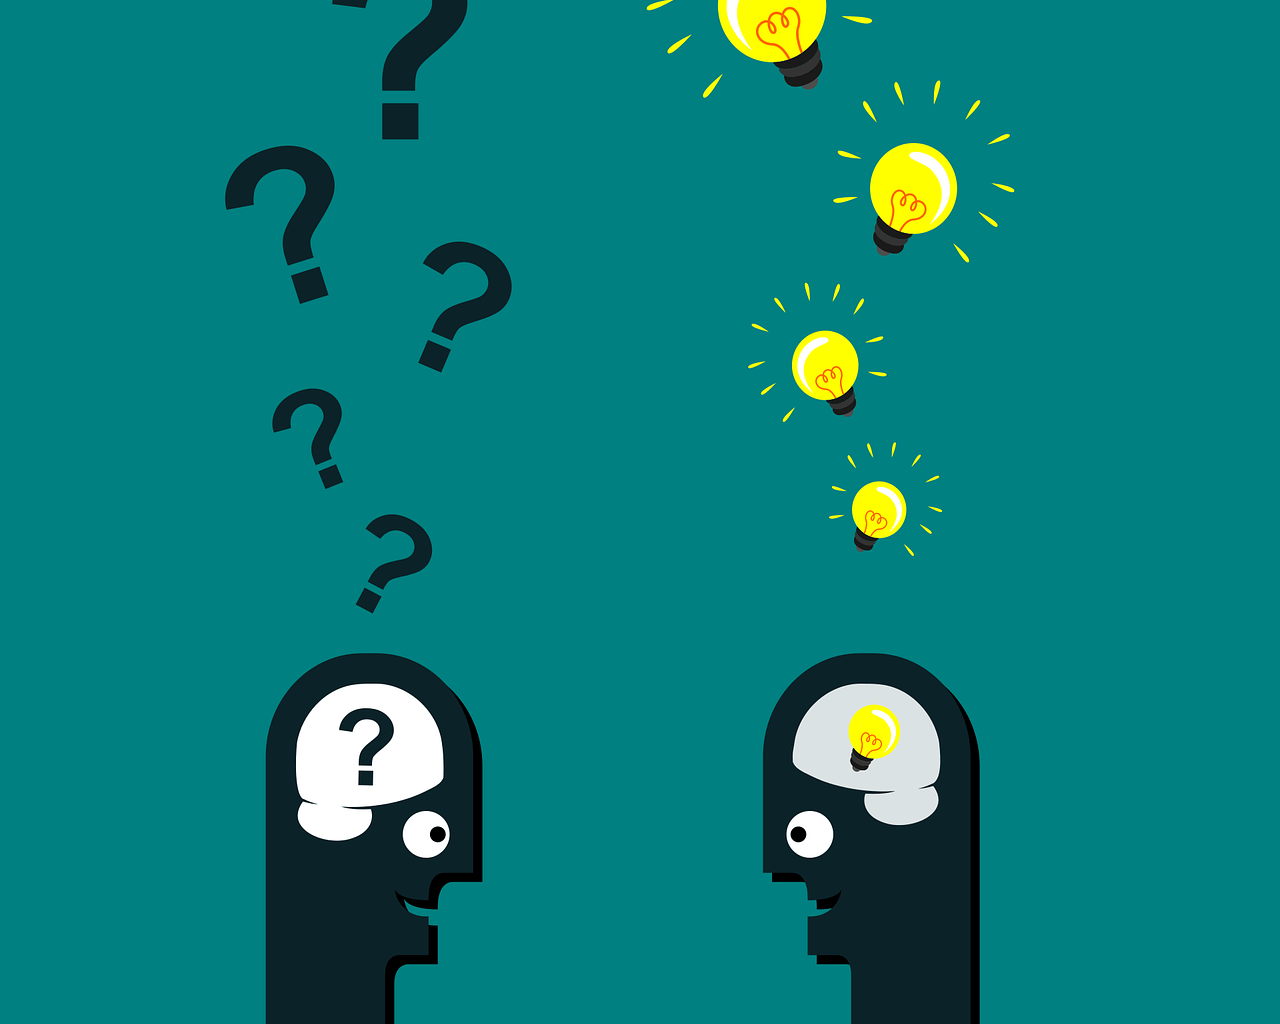 Questions and ideas concept on a plain background